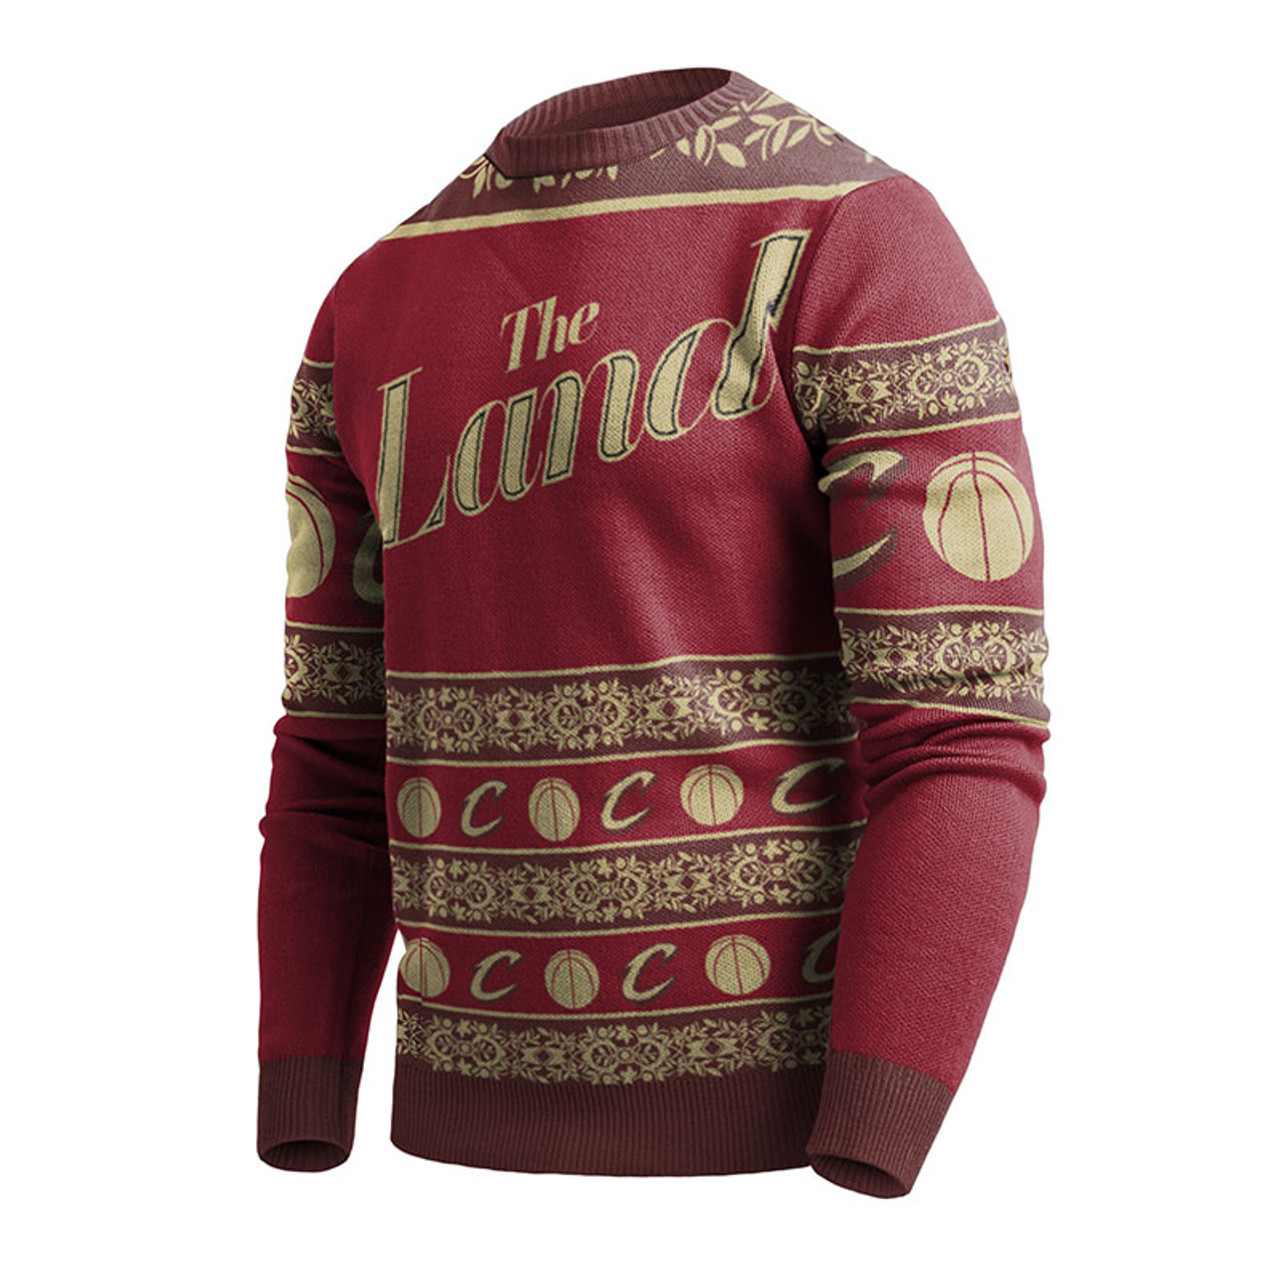 The Land Ugly Sweater  Center Court, the official Cavs Team Shop